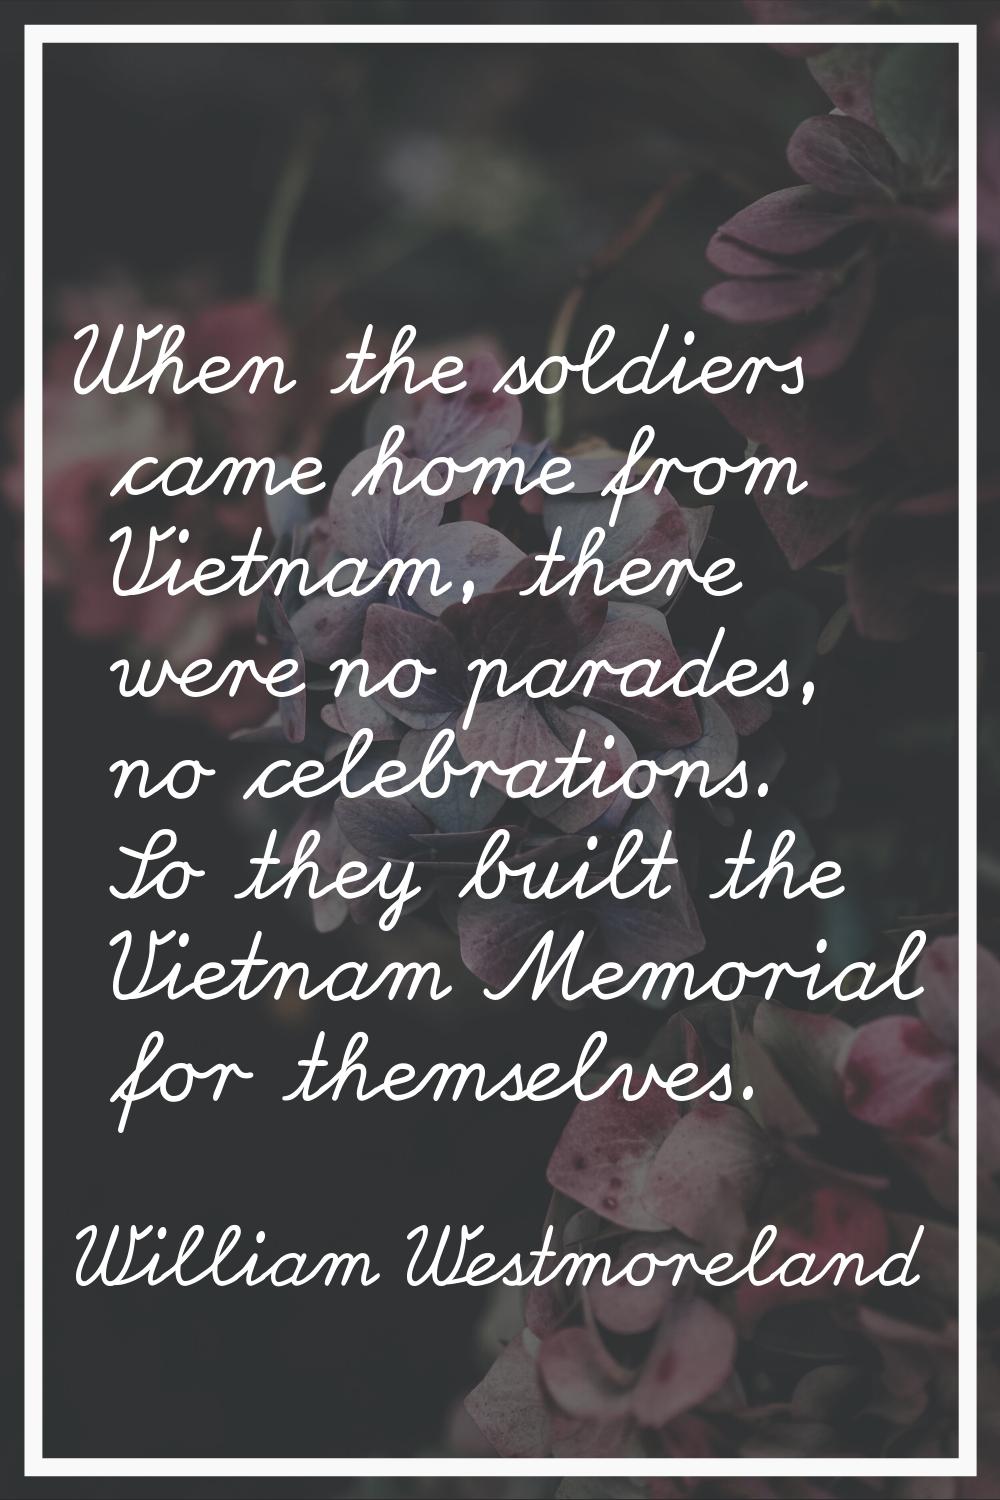 When the soldiers came home from Vietnam, there were no parades, no celebrations. So they built the